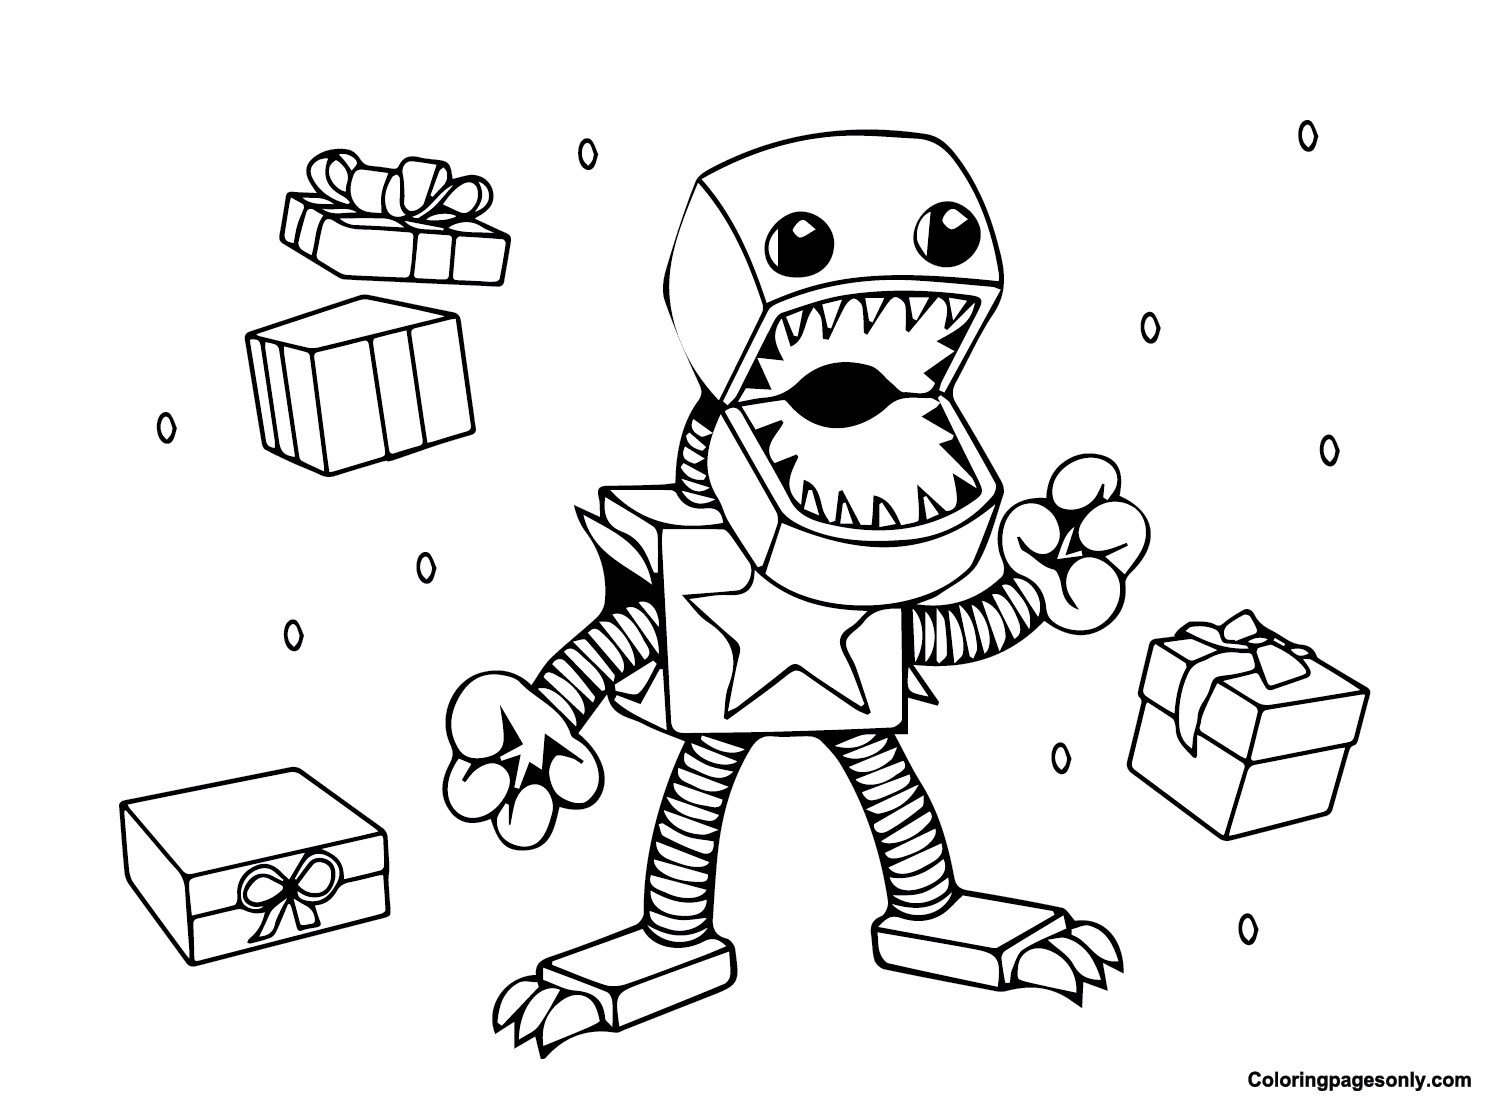 Printable Boxy Boo Coloring Page Free Printable Coloring Pages